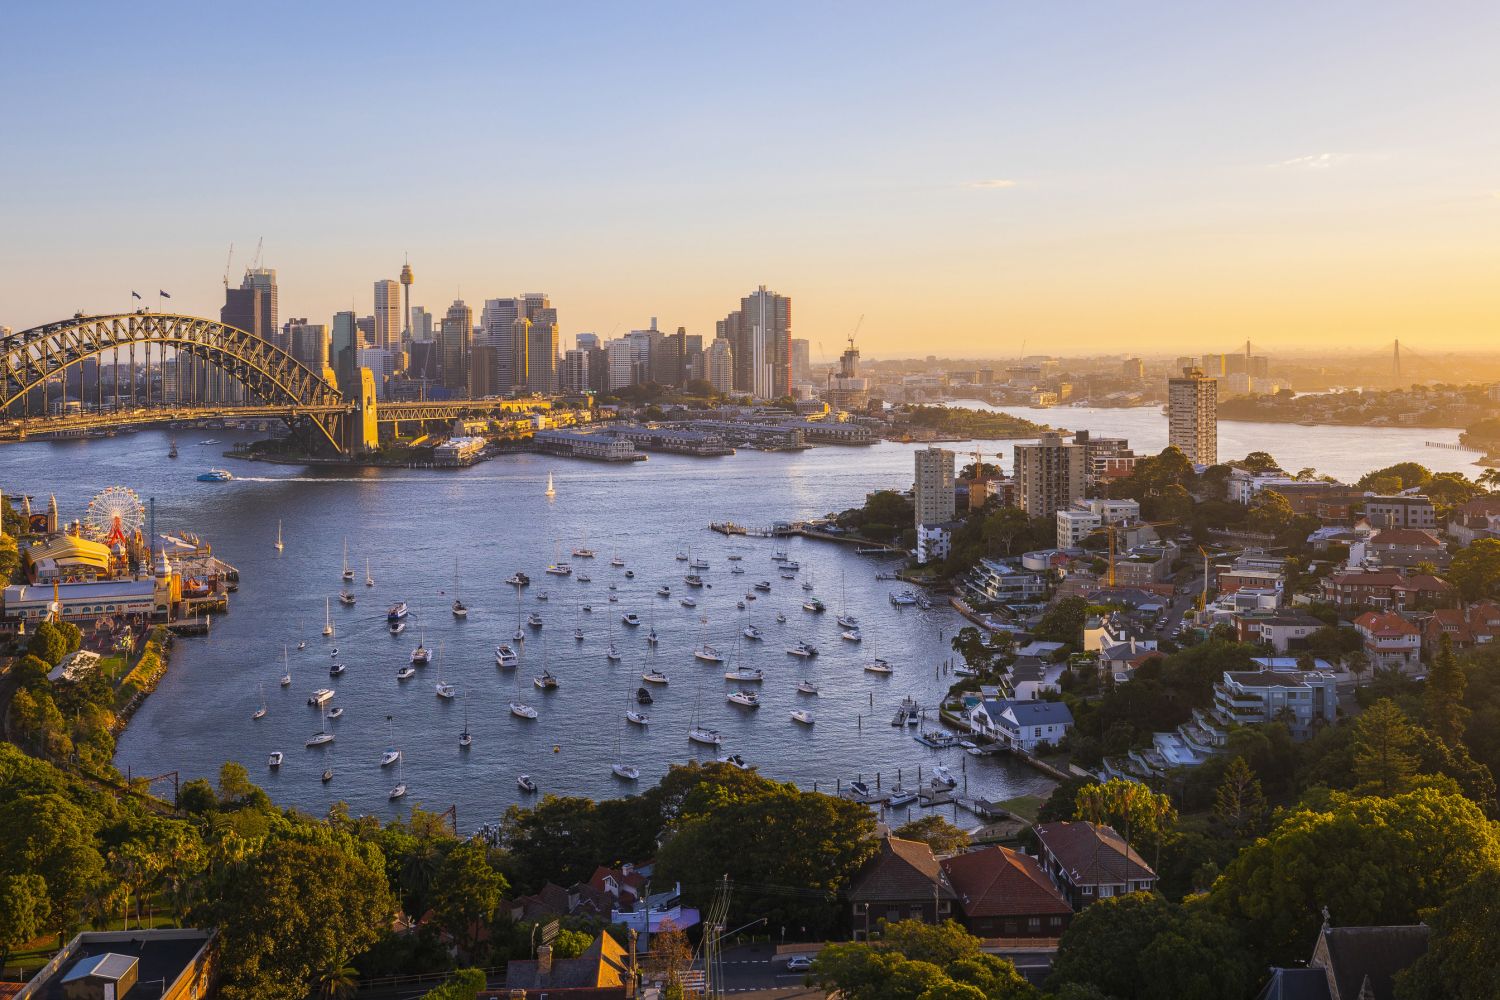 The City of Sydney, feature image